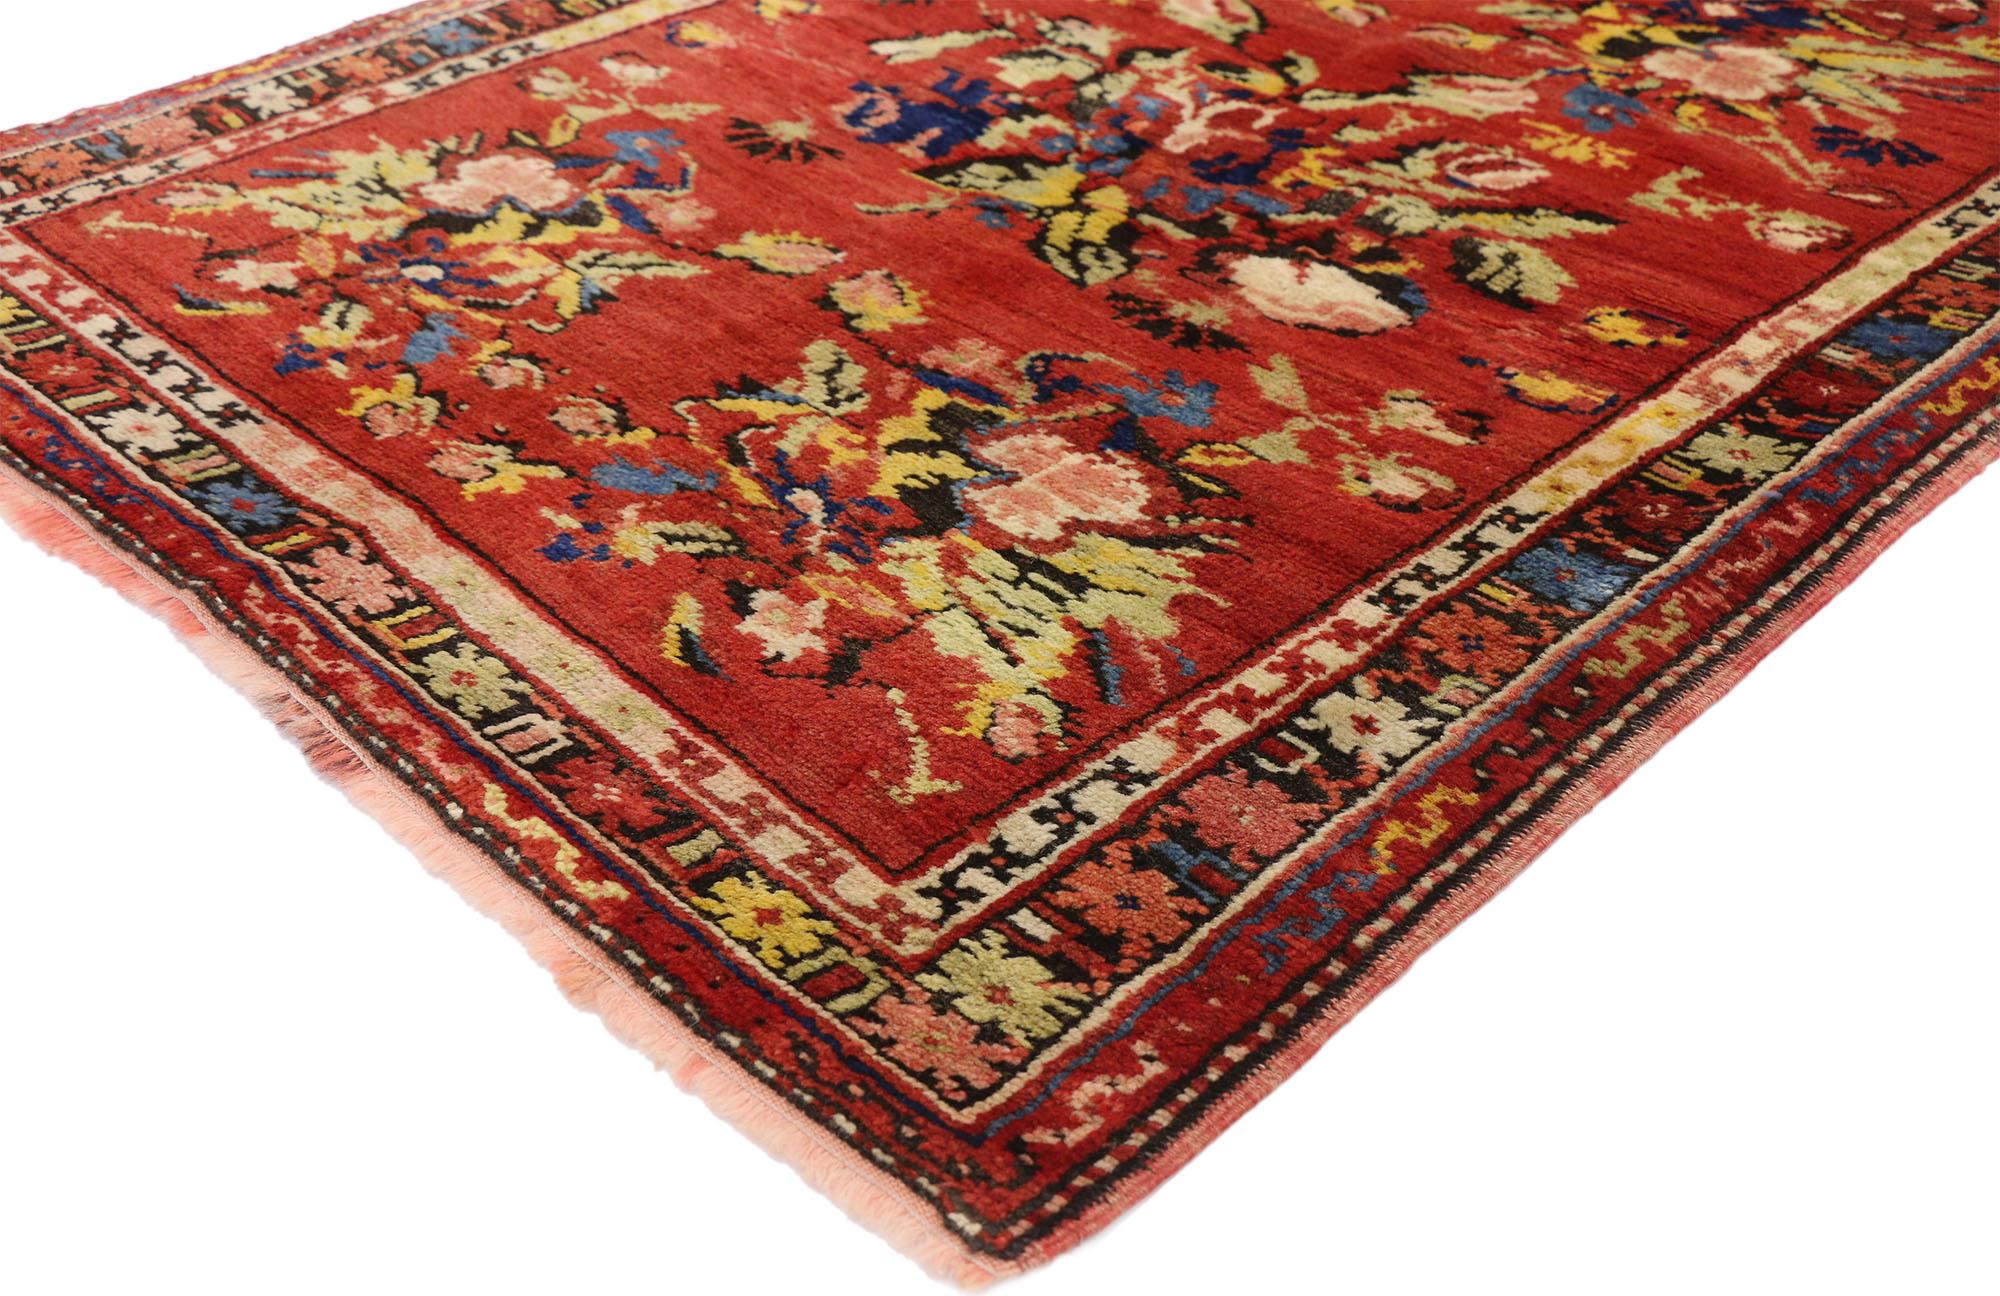 52449 Vintage Turkish Oushak Rug with Bessarabian Floral Chintz Style 03'05 x 04'07. Drawing inspiration from Mario Buatta and Chintz style, this hand knotted wool vintage Turkish Oushak rug with Bessarabian Cottage style features five stylized